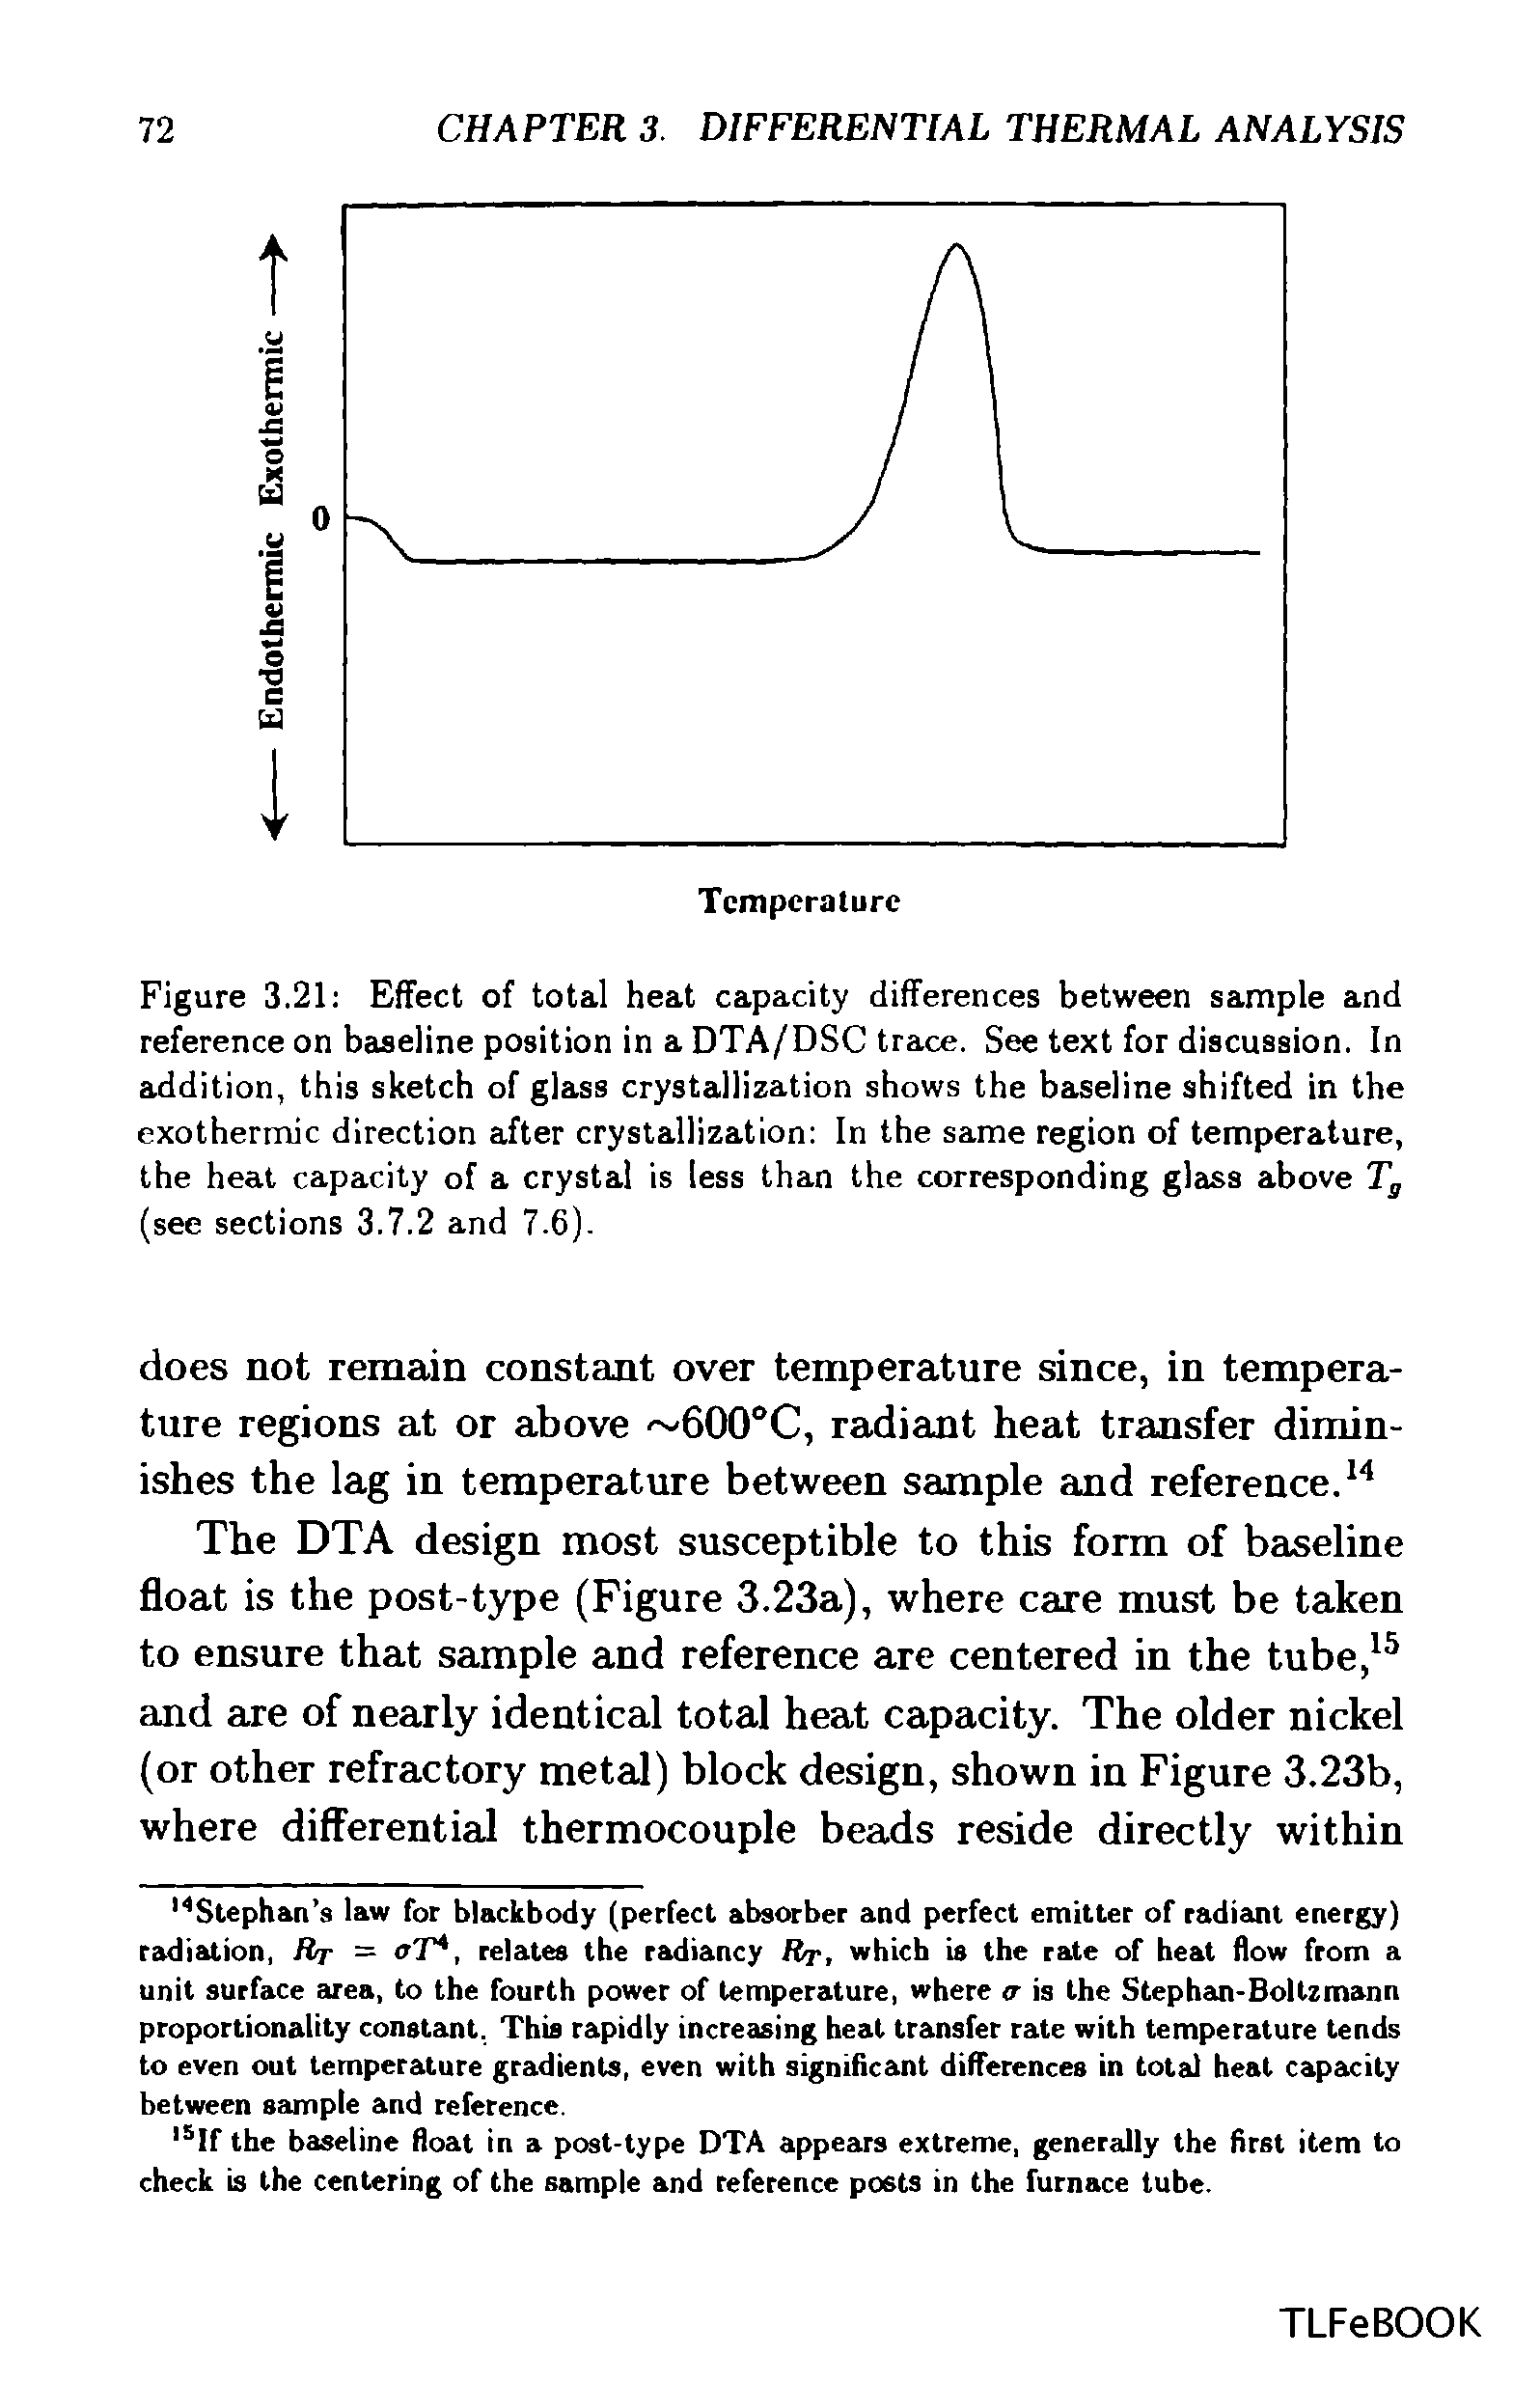 Figure 3.21 Effect of total heat capacity differences between sample and reference on baseline position in a DTA/DSC trace. See text for discussion. In addition, this sketch of glass crystallization shows the baseline shifted in the exothermic direction after crystallization In the same region of temperature, the heat capacity of a crystal is less than the corresponding glass above Tg (see sections 3.7.2 and 7.6).